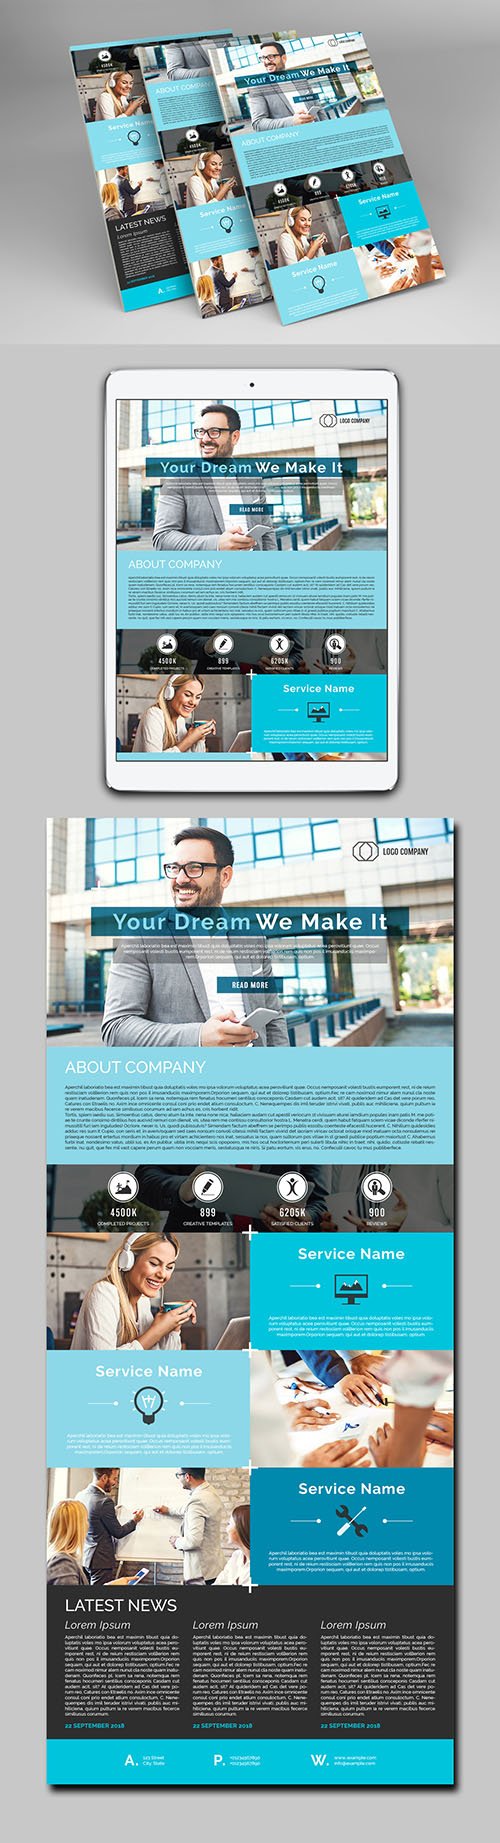 Web Newsletter Layout with Blue Accents